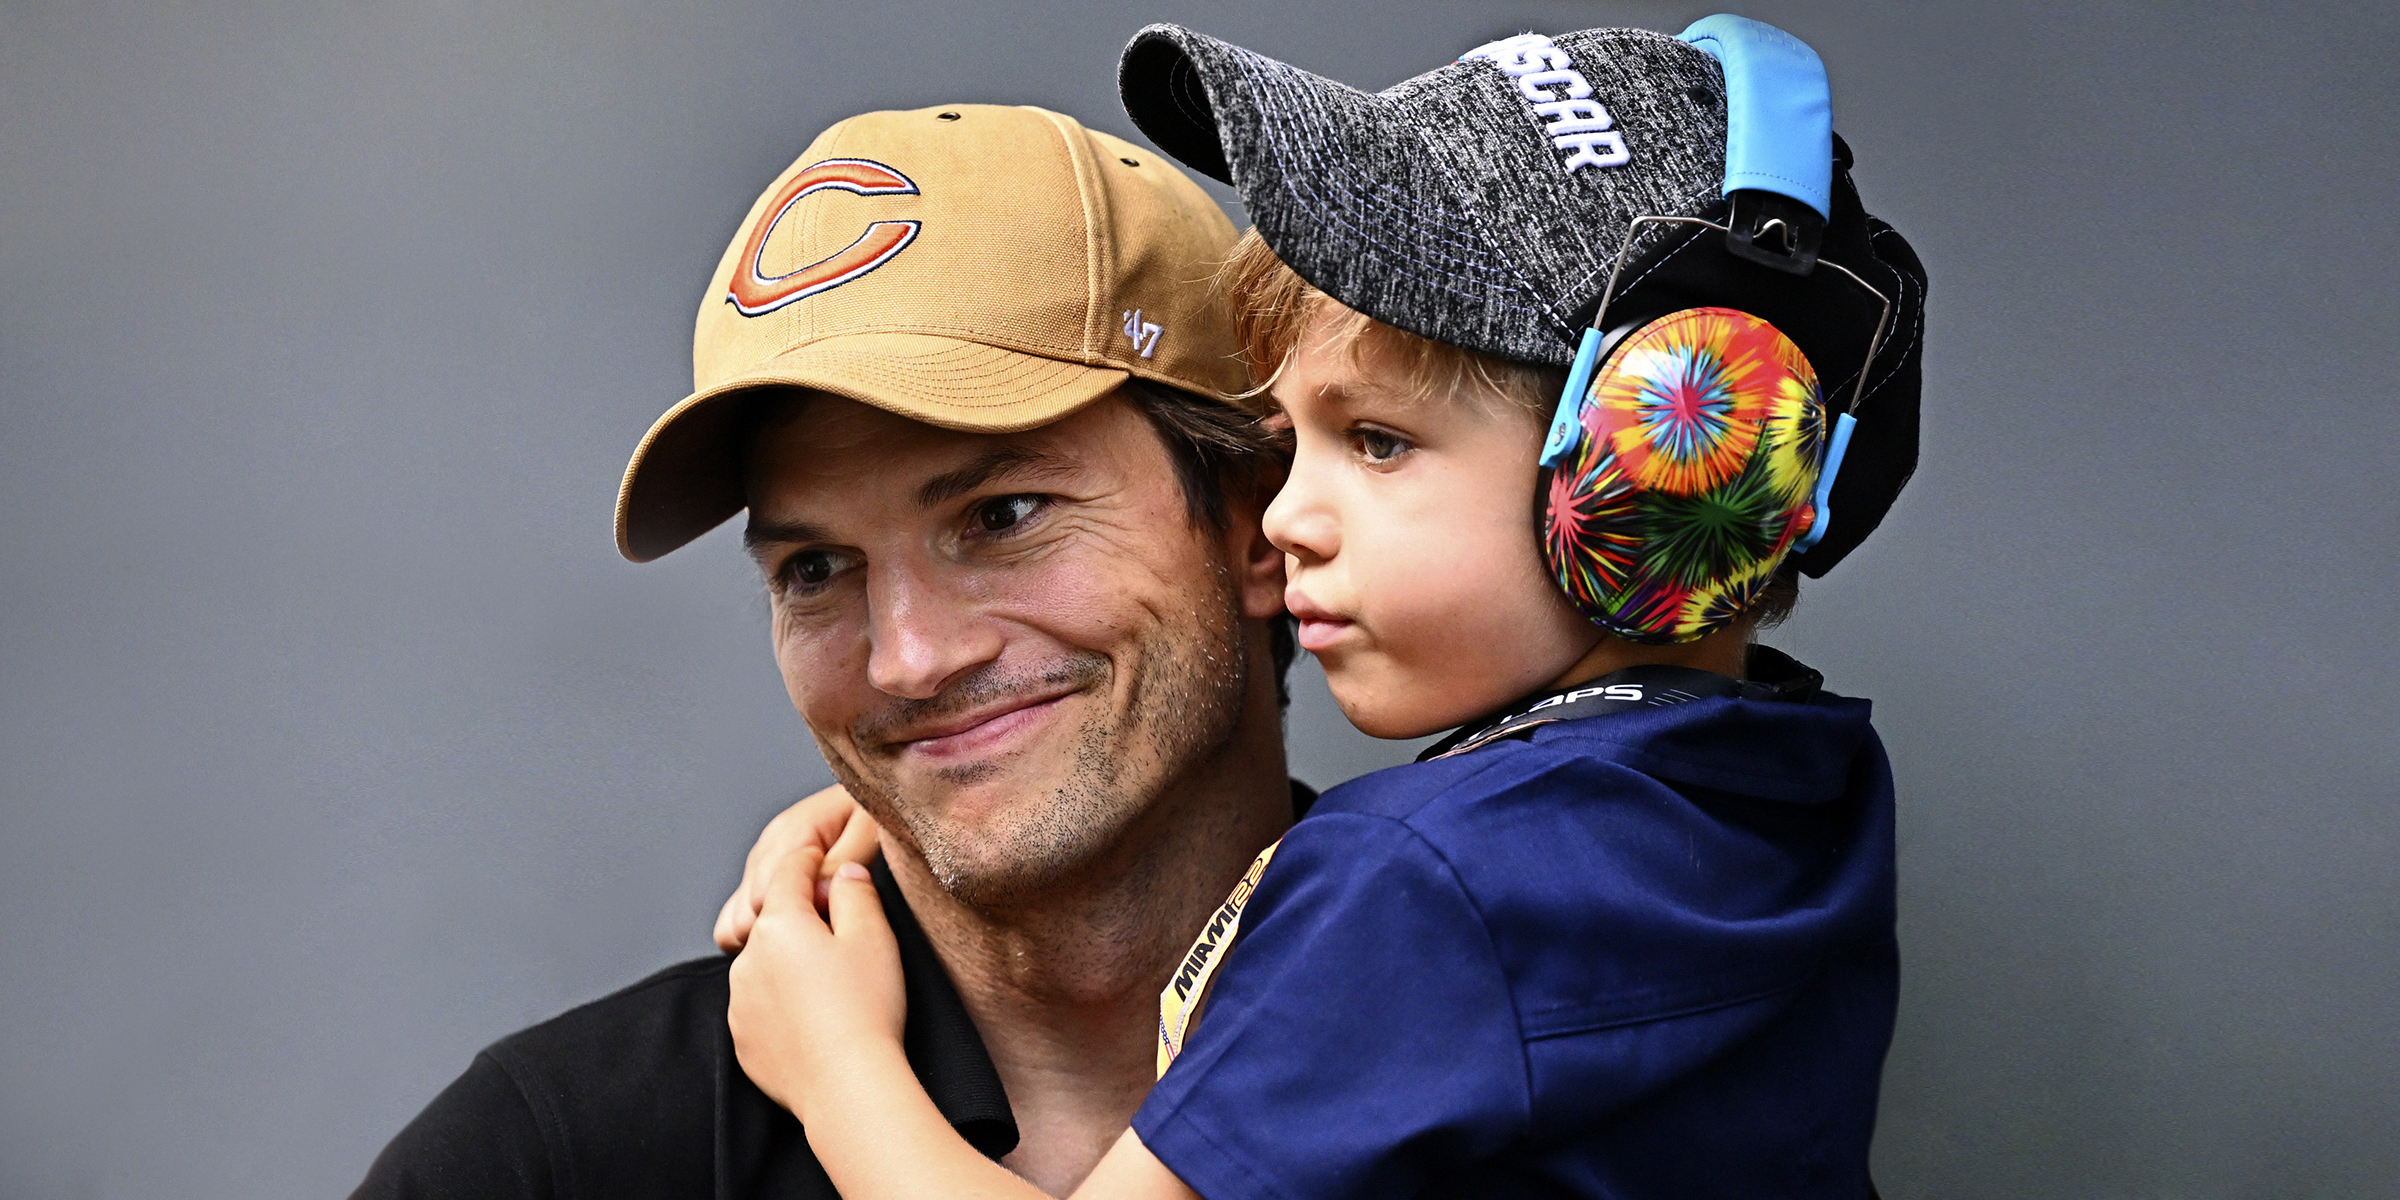 Ashton Kutcher and his son Dmitri | Source: Getty Images